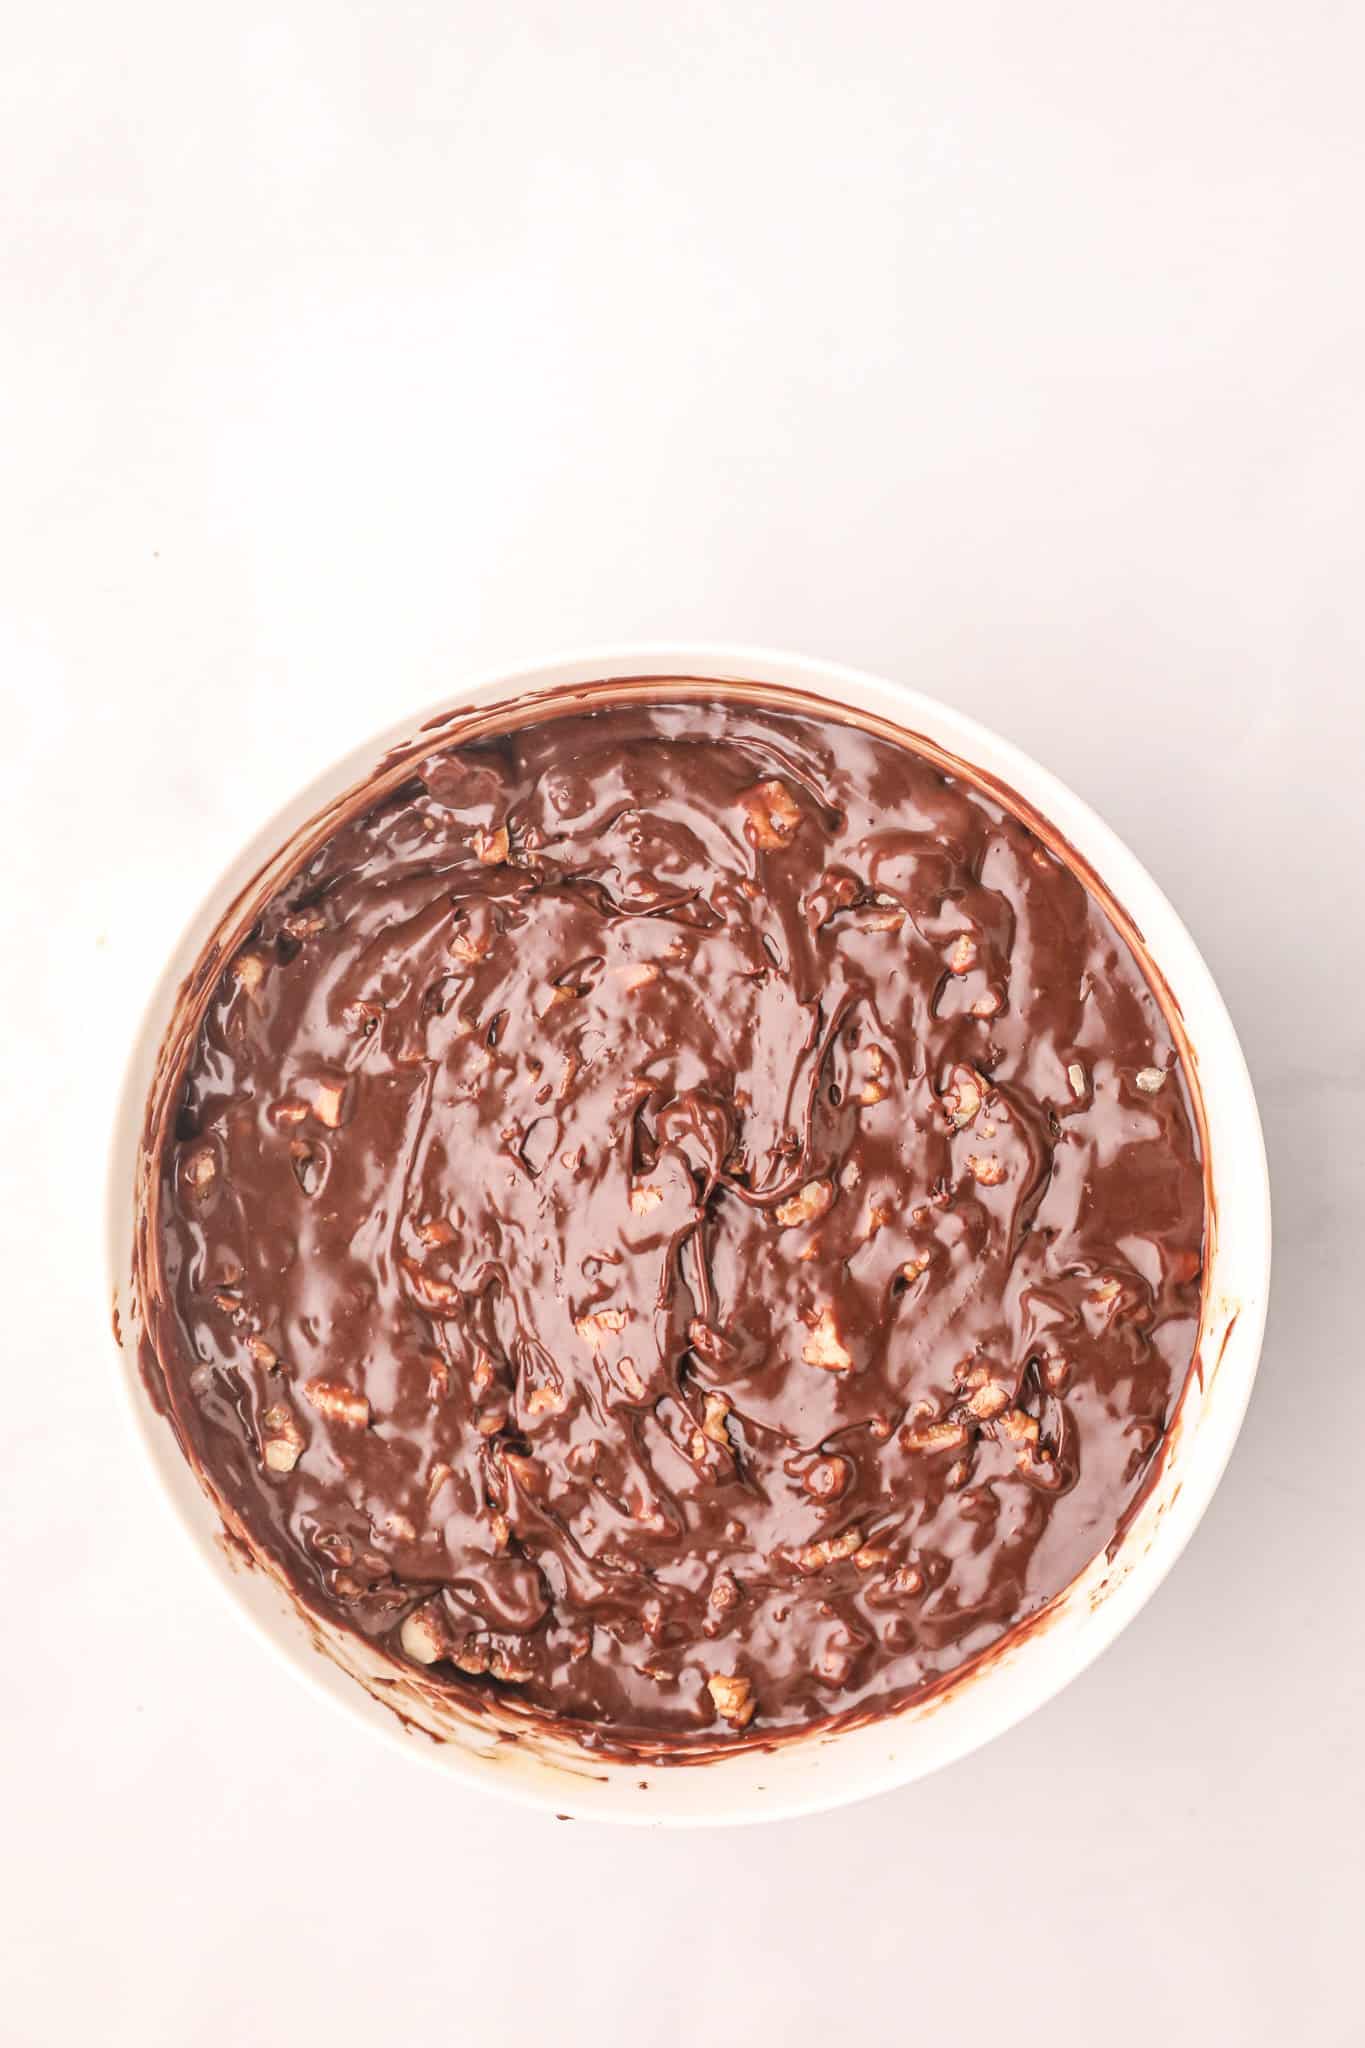 melted chocolate fudge and walnut mixture in a mixing bowl